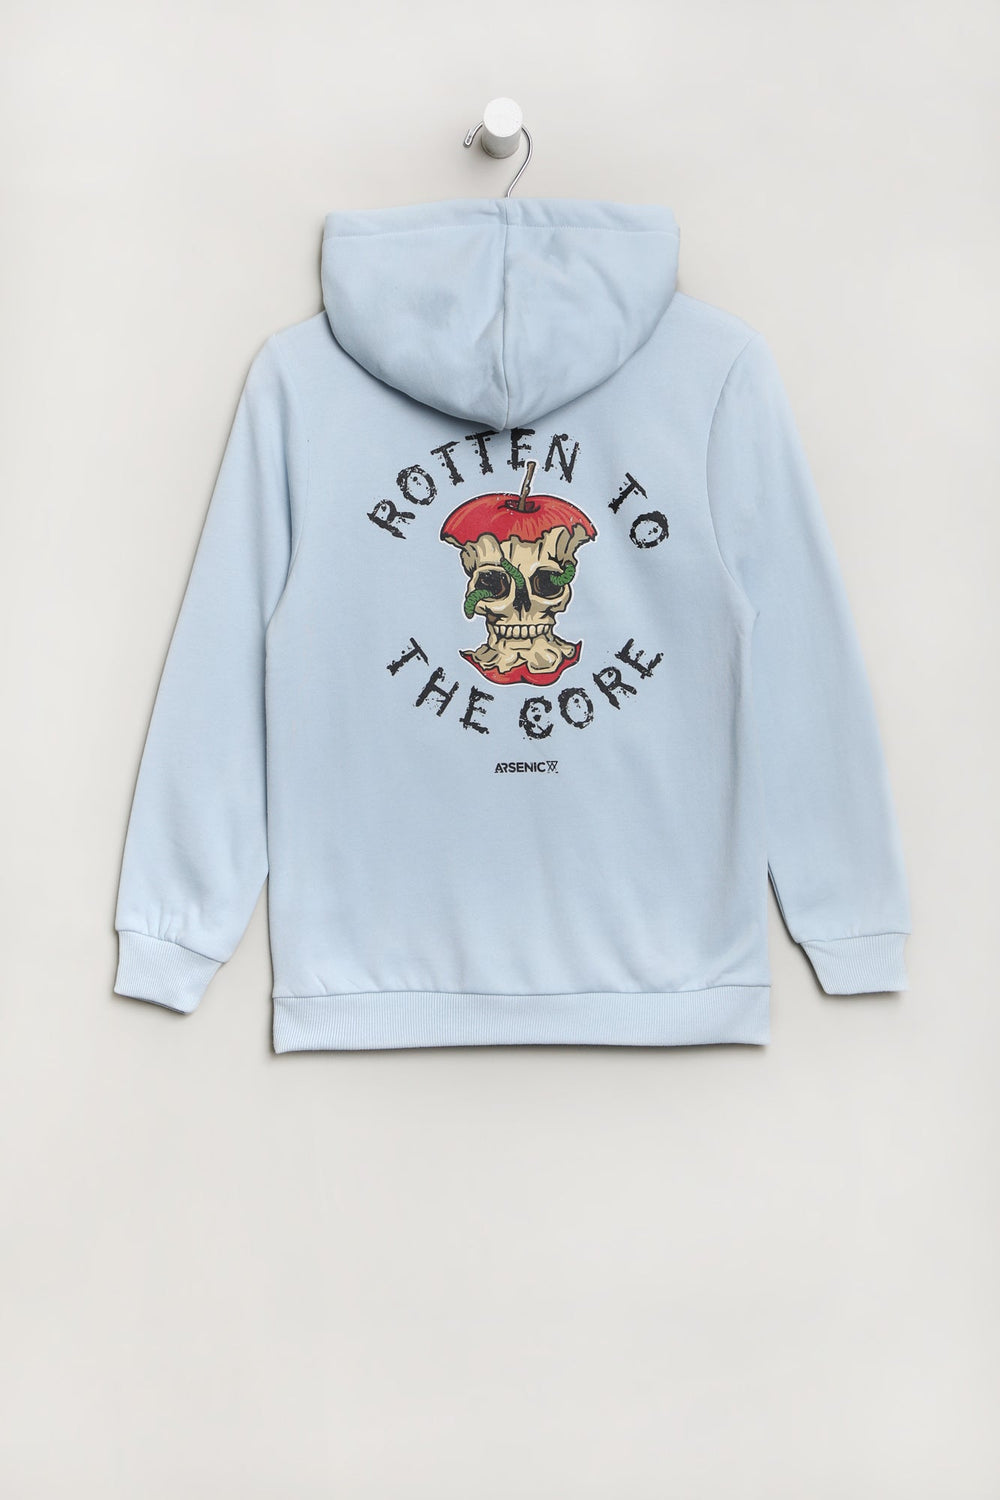 Arsenic Youth Rotten to the Core Hoodie Arsenic Youth Rotten to the Core Hoodie